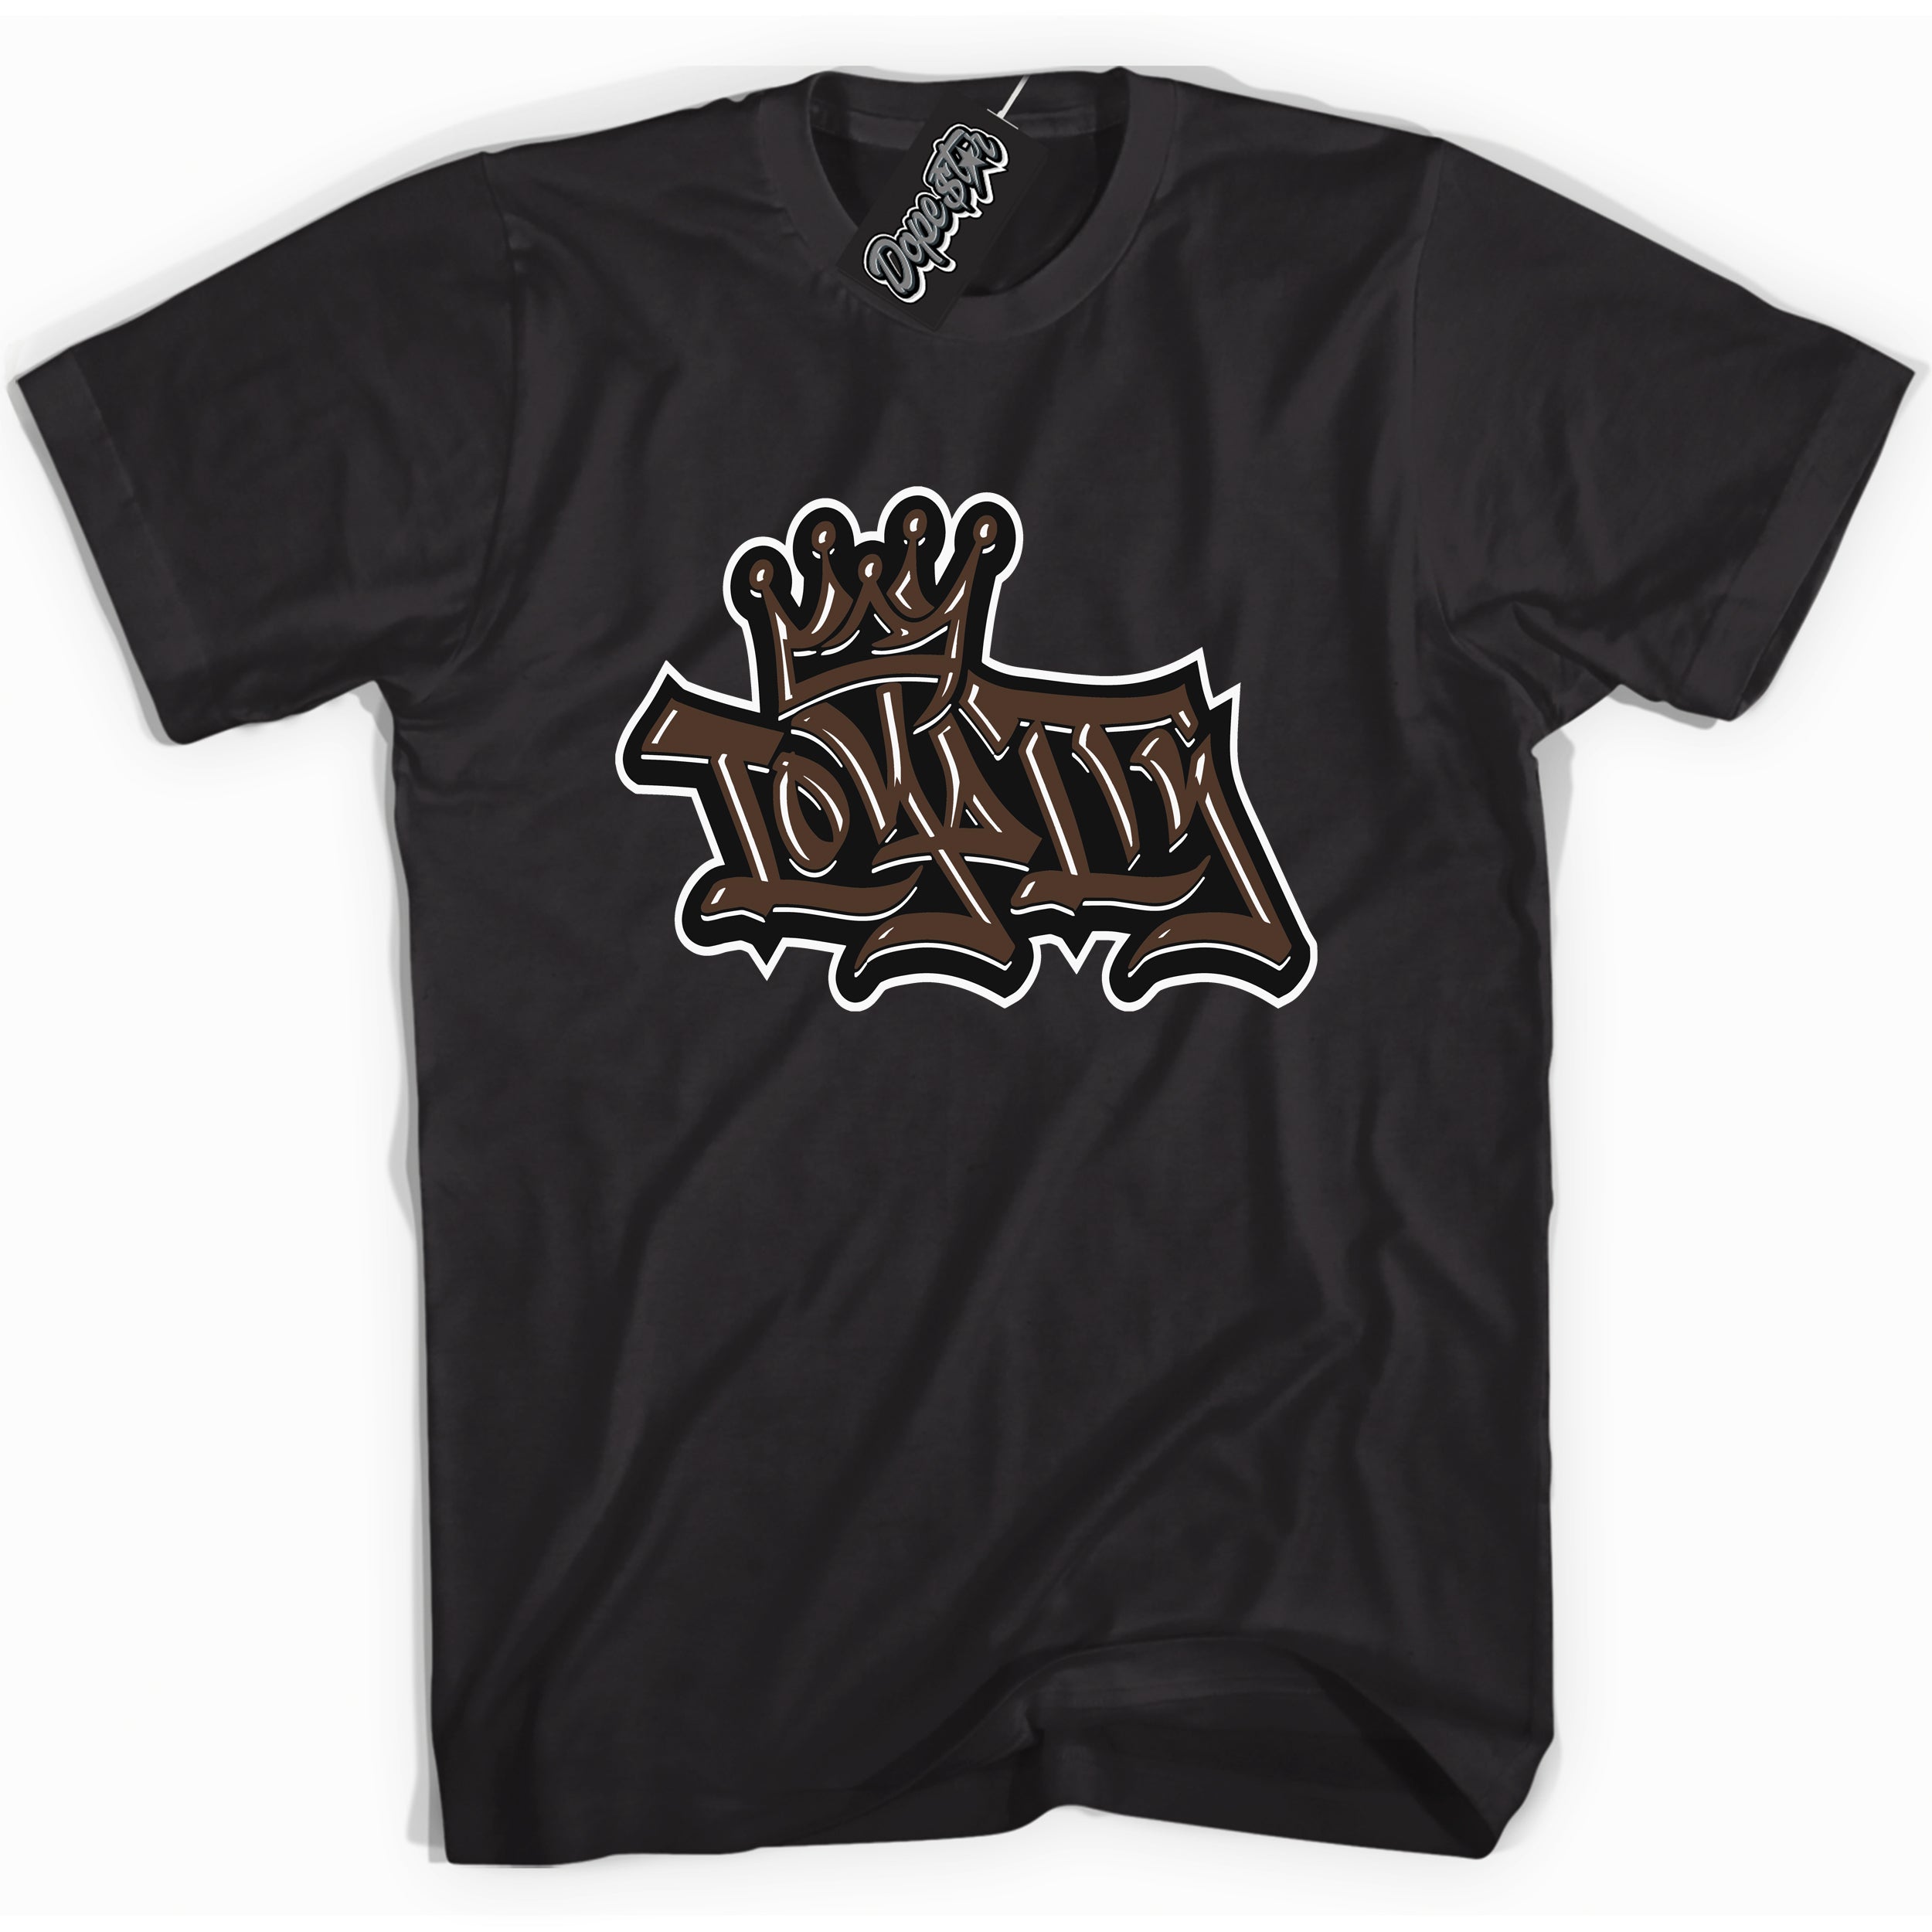 Cool Black graphic tee with “ Loyalty Crown ” design, that perfectly matches Palomino 1s sneakers 